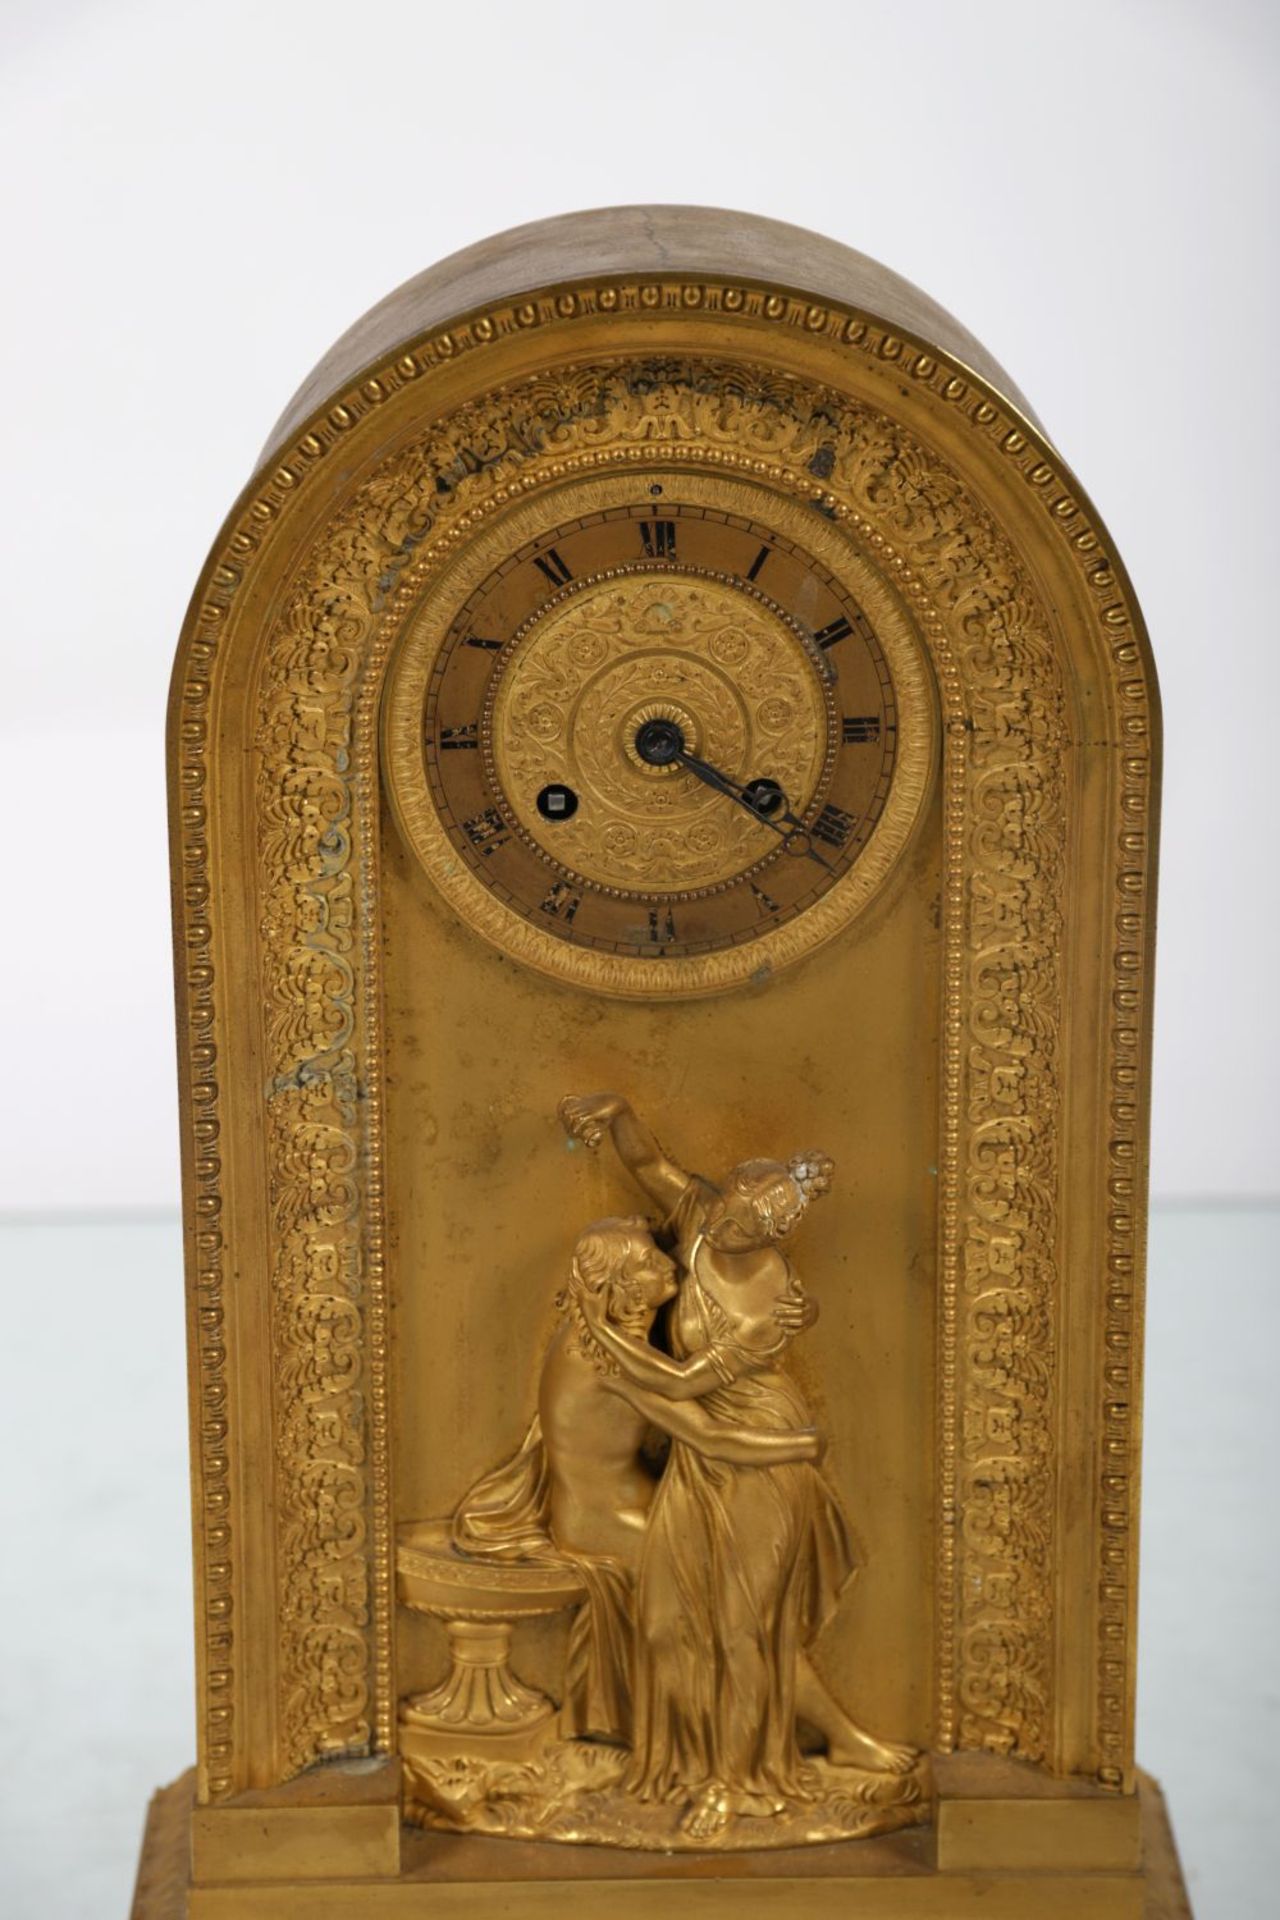 19TH-CENTURY FRENCH EMPIRE MANTLE CLOCK - Image 2 of 3